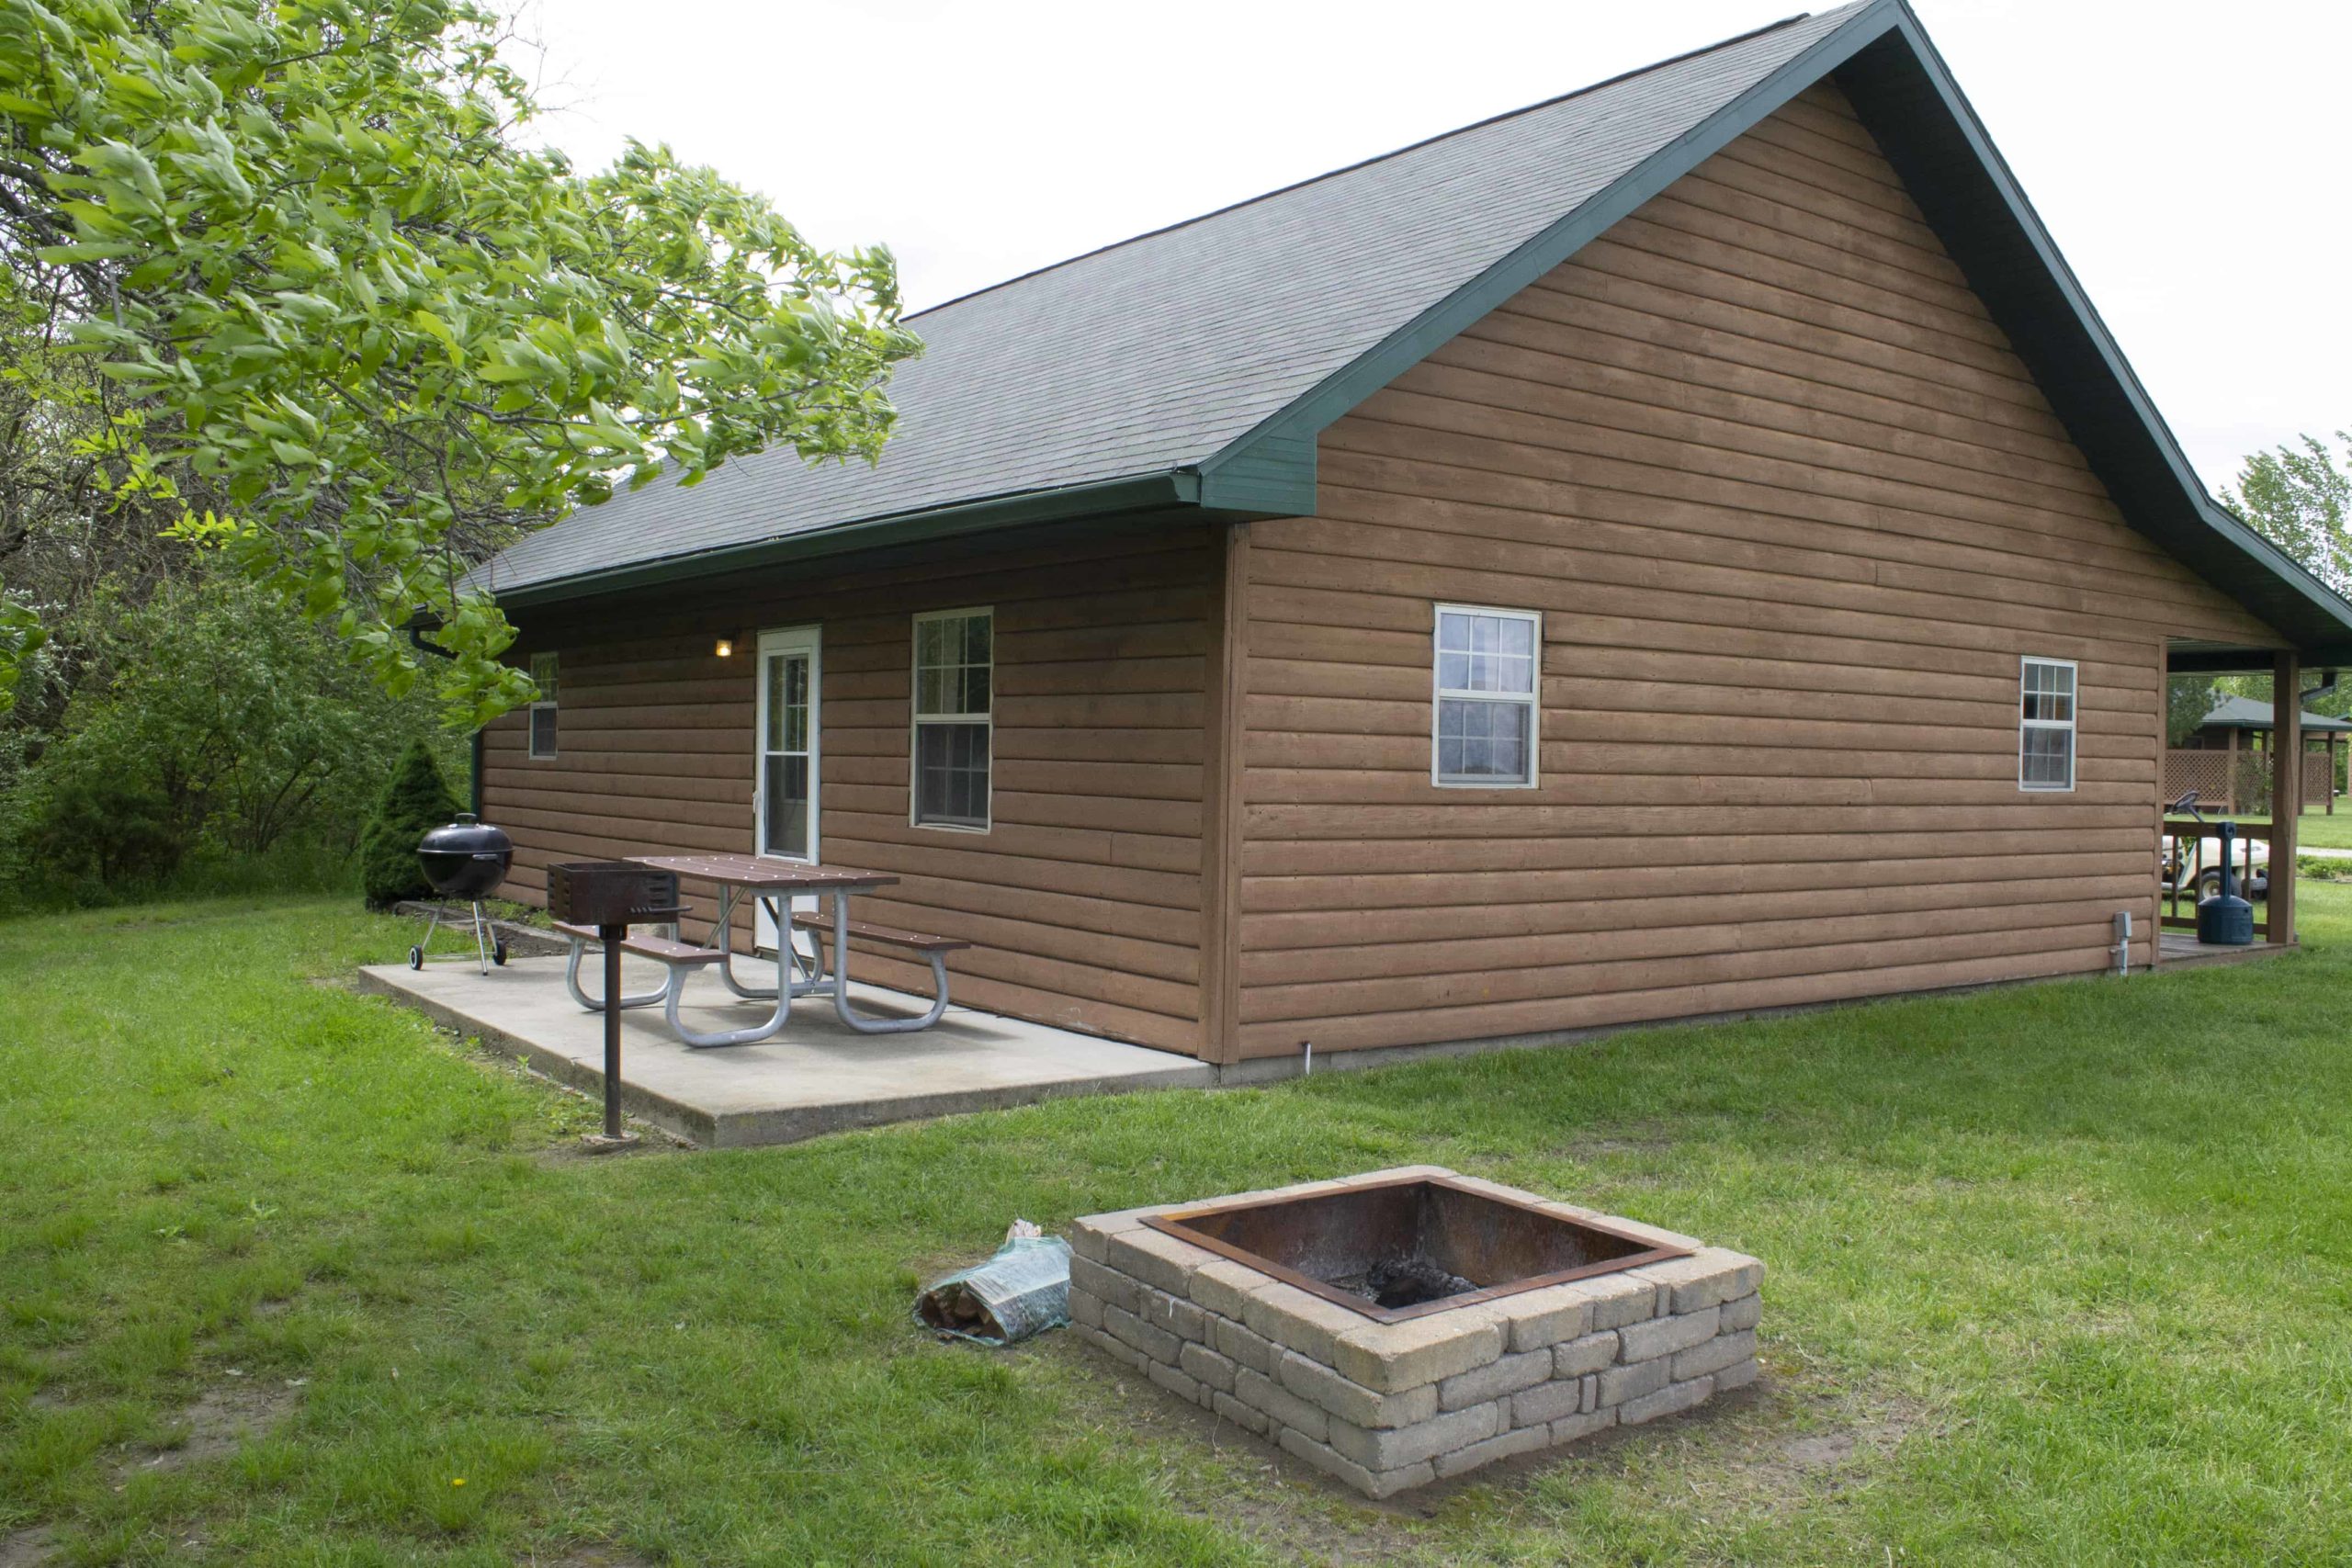 picnic table, grill, and firepit at vacation cabin rental site in shelbyville illinois